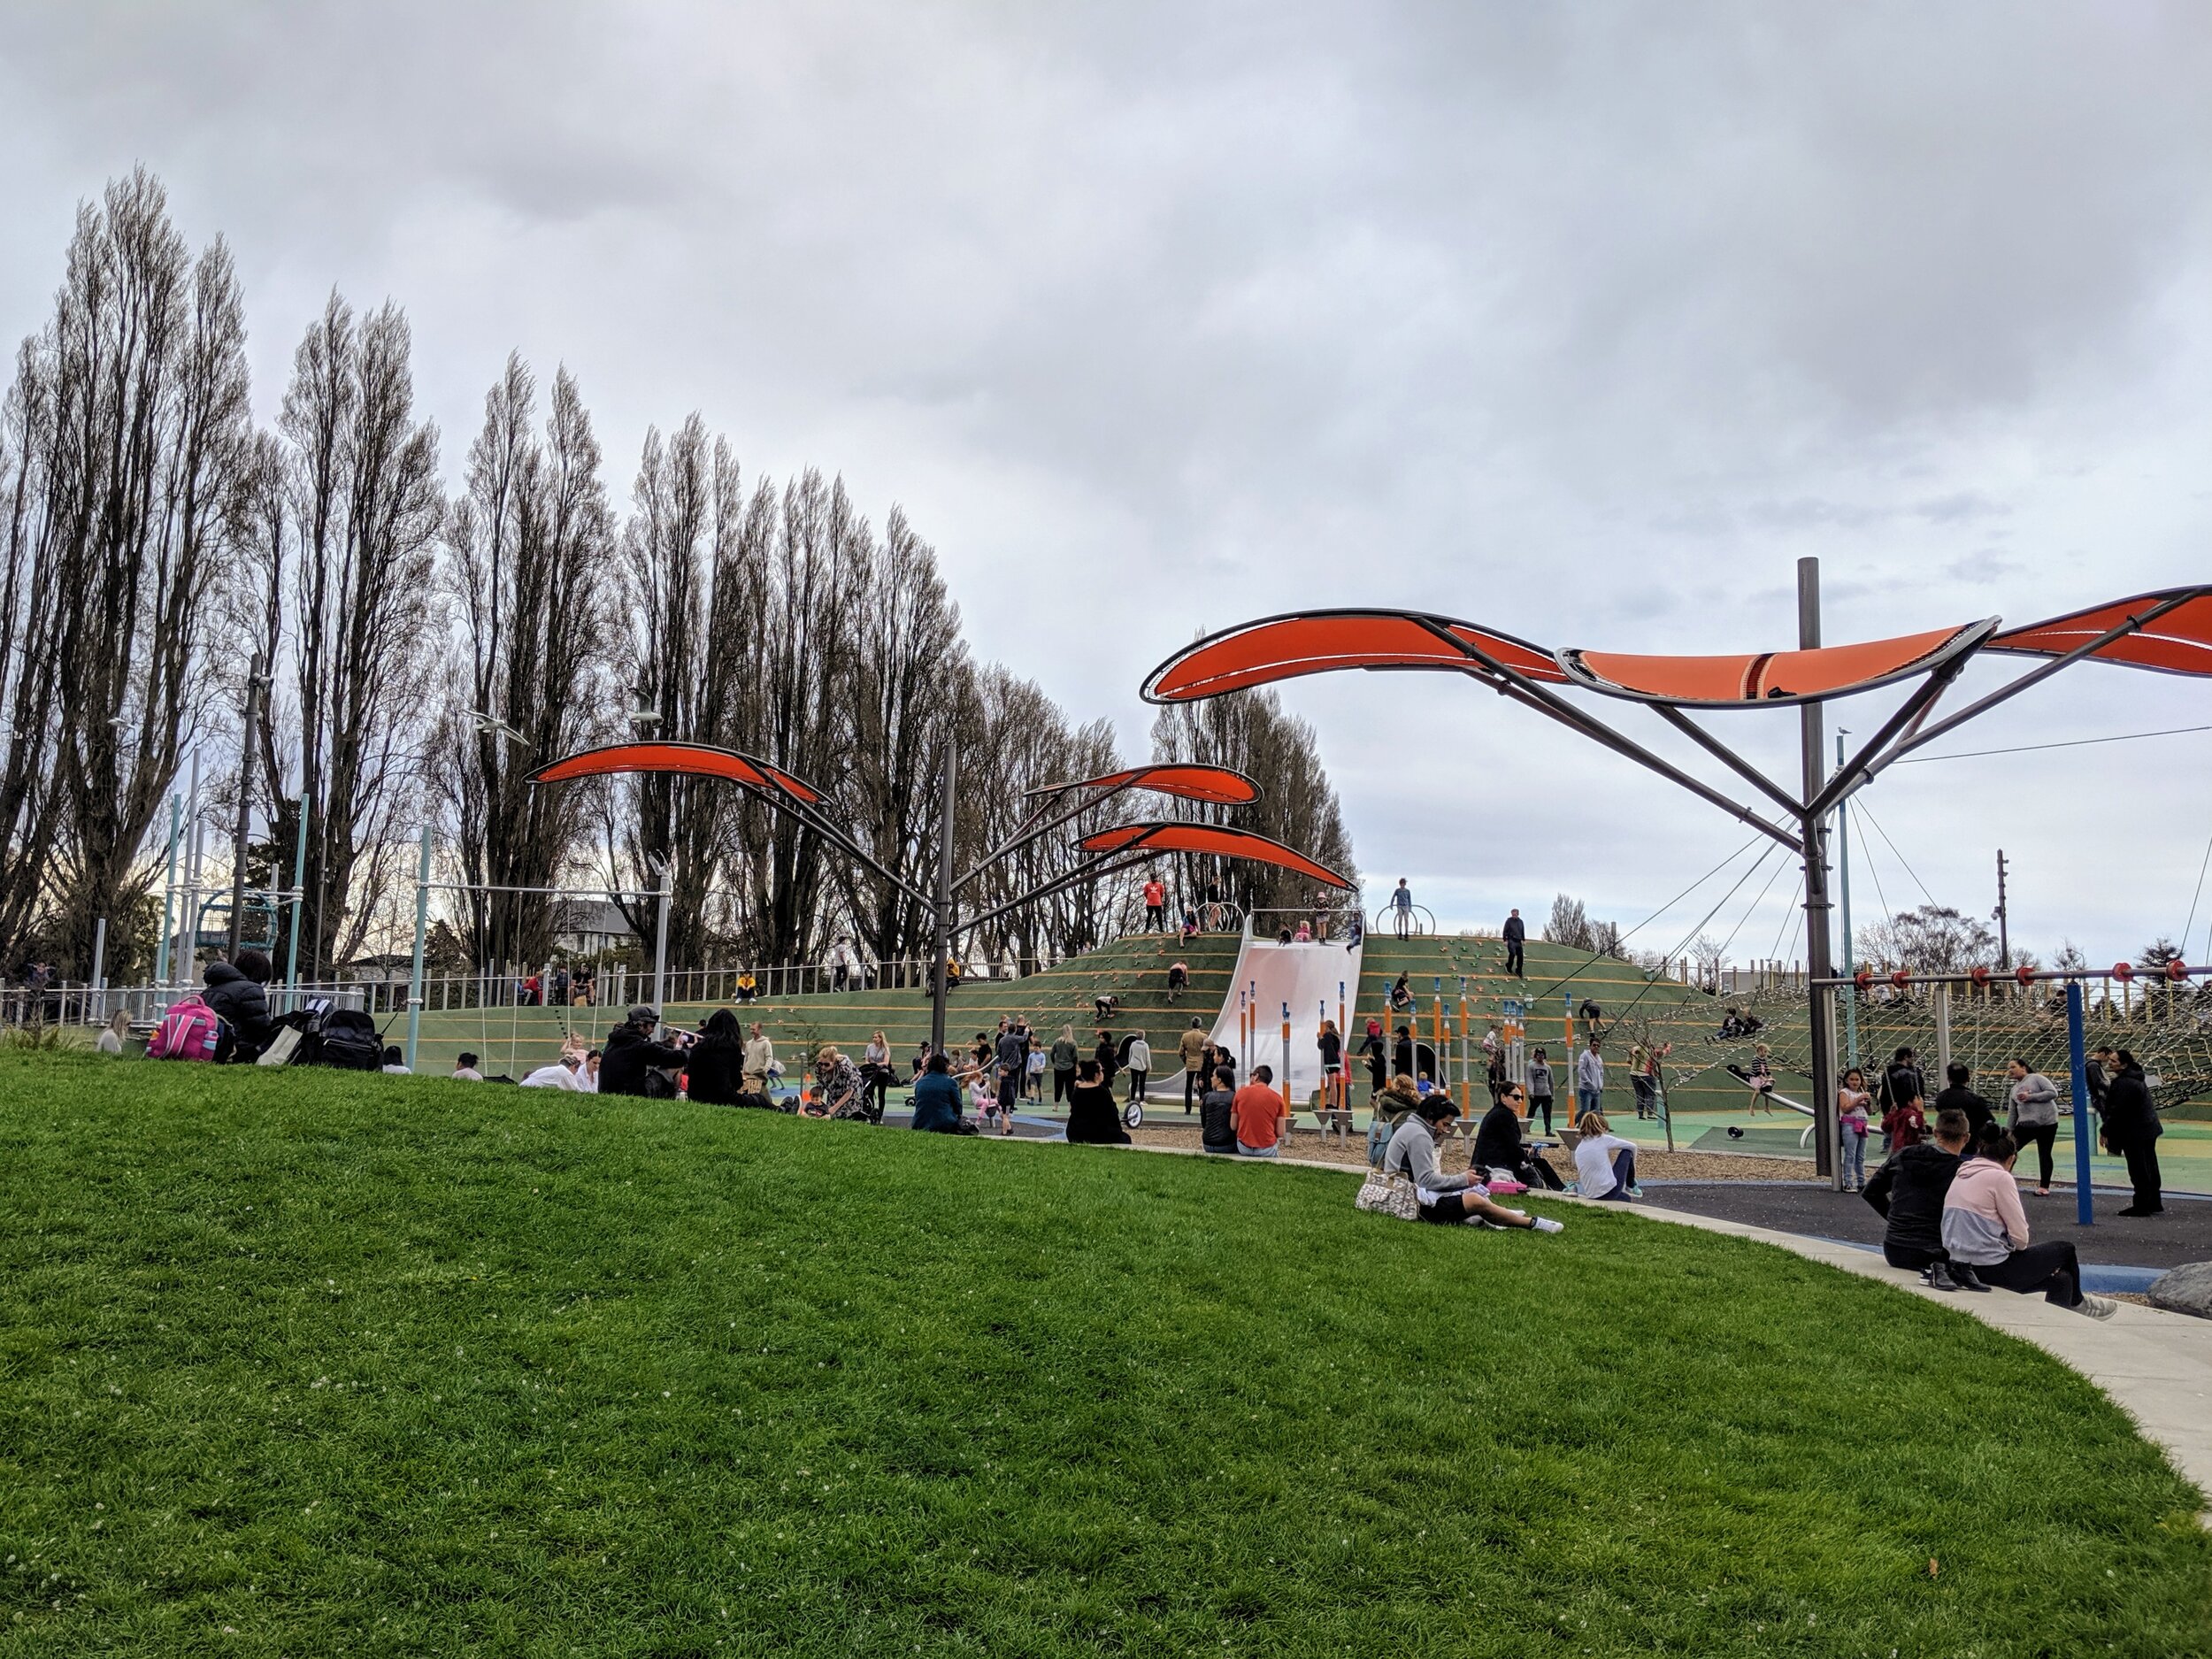  Margaret Mahy Playground in Christchurch, built after the earthquake of 2011. 